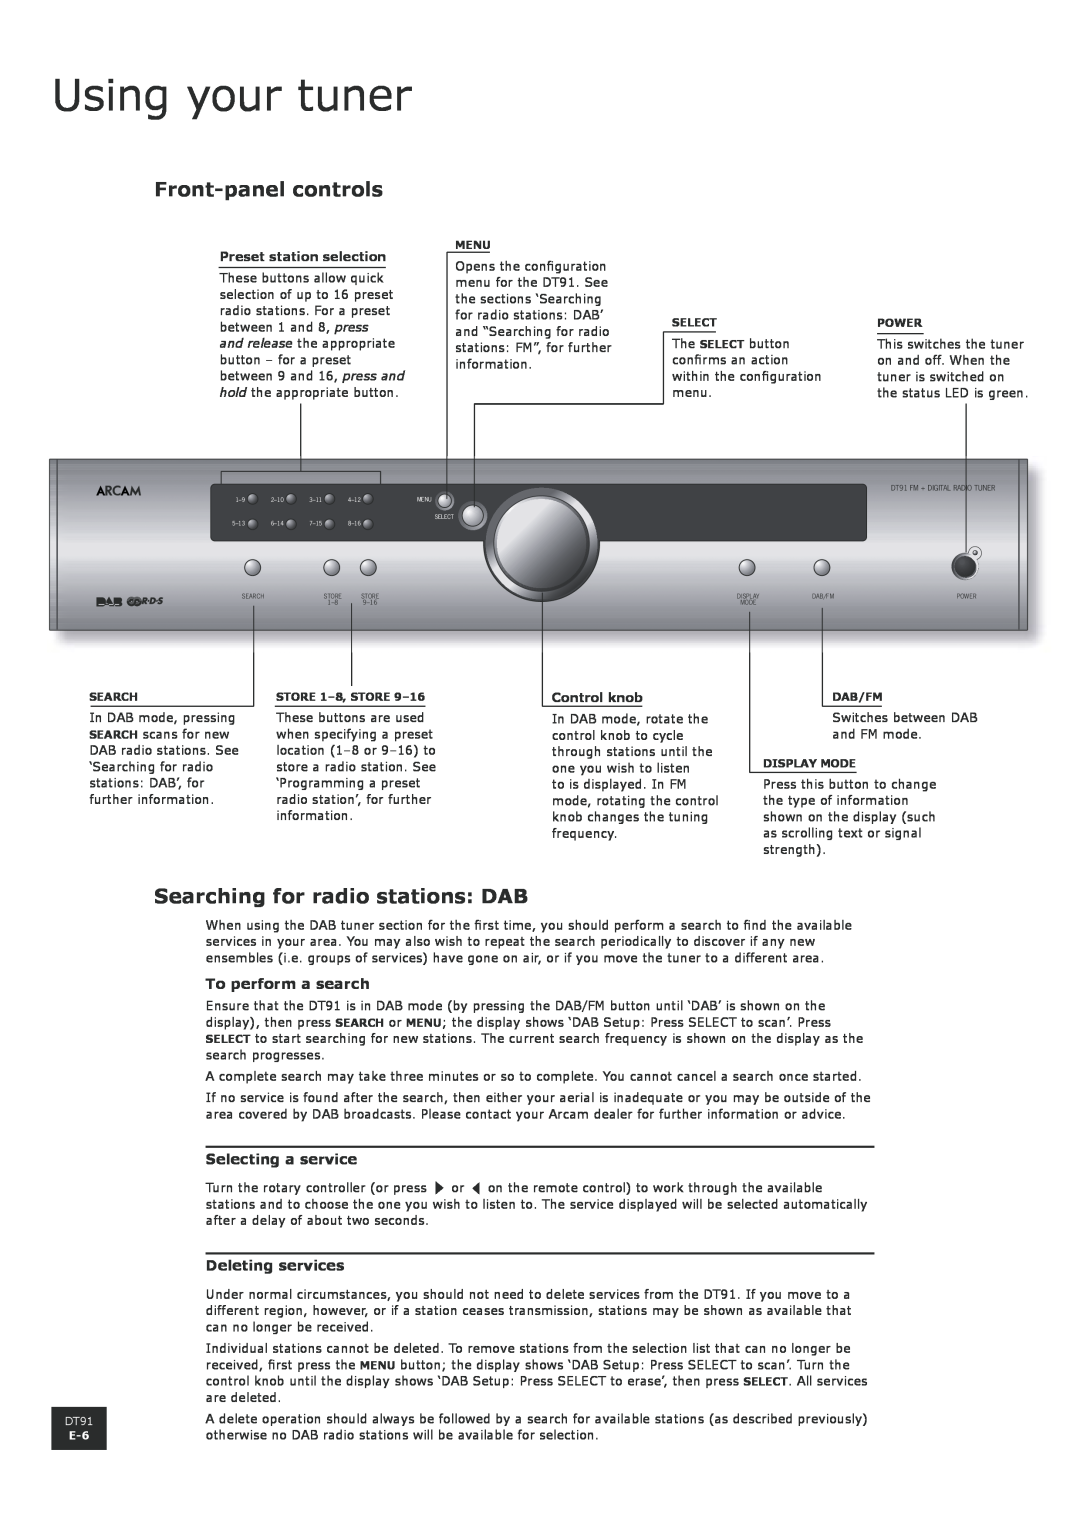 Arcam DT91 Using your tuner, Front-panelcontrols, Searching for radio stations DAB, To perform a search, Deleting services 